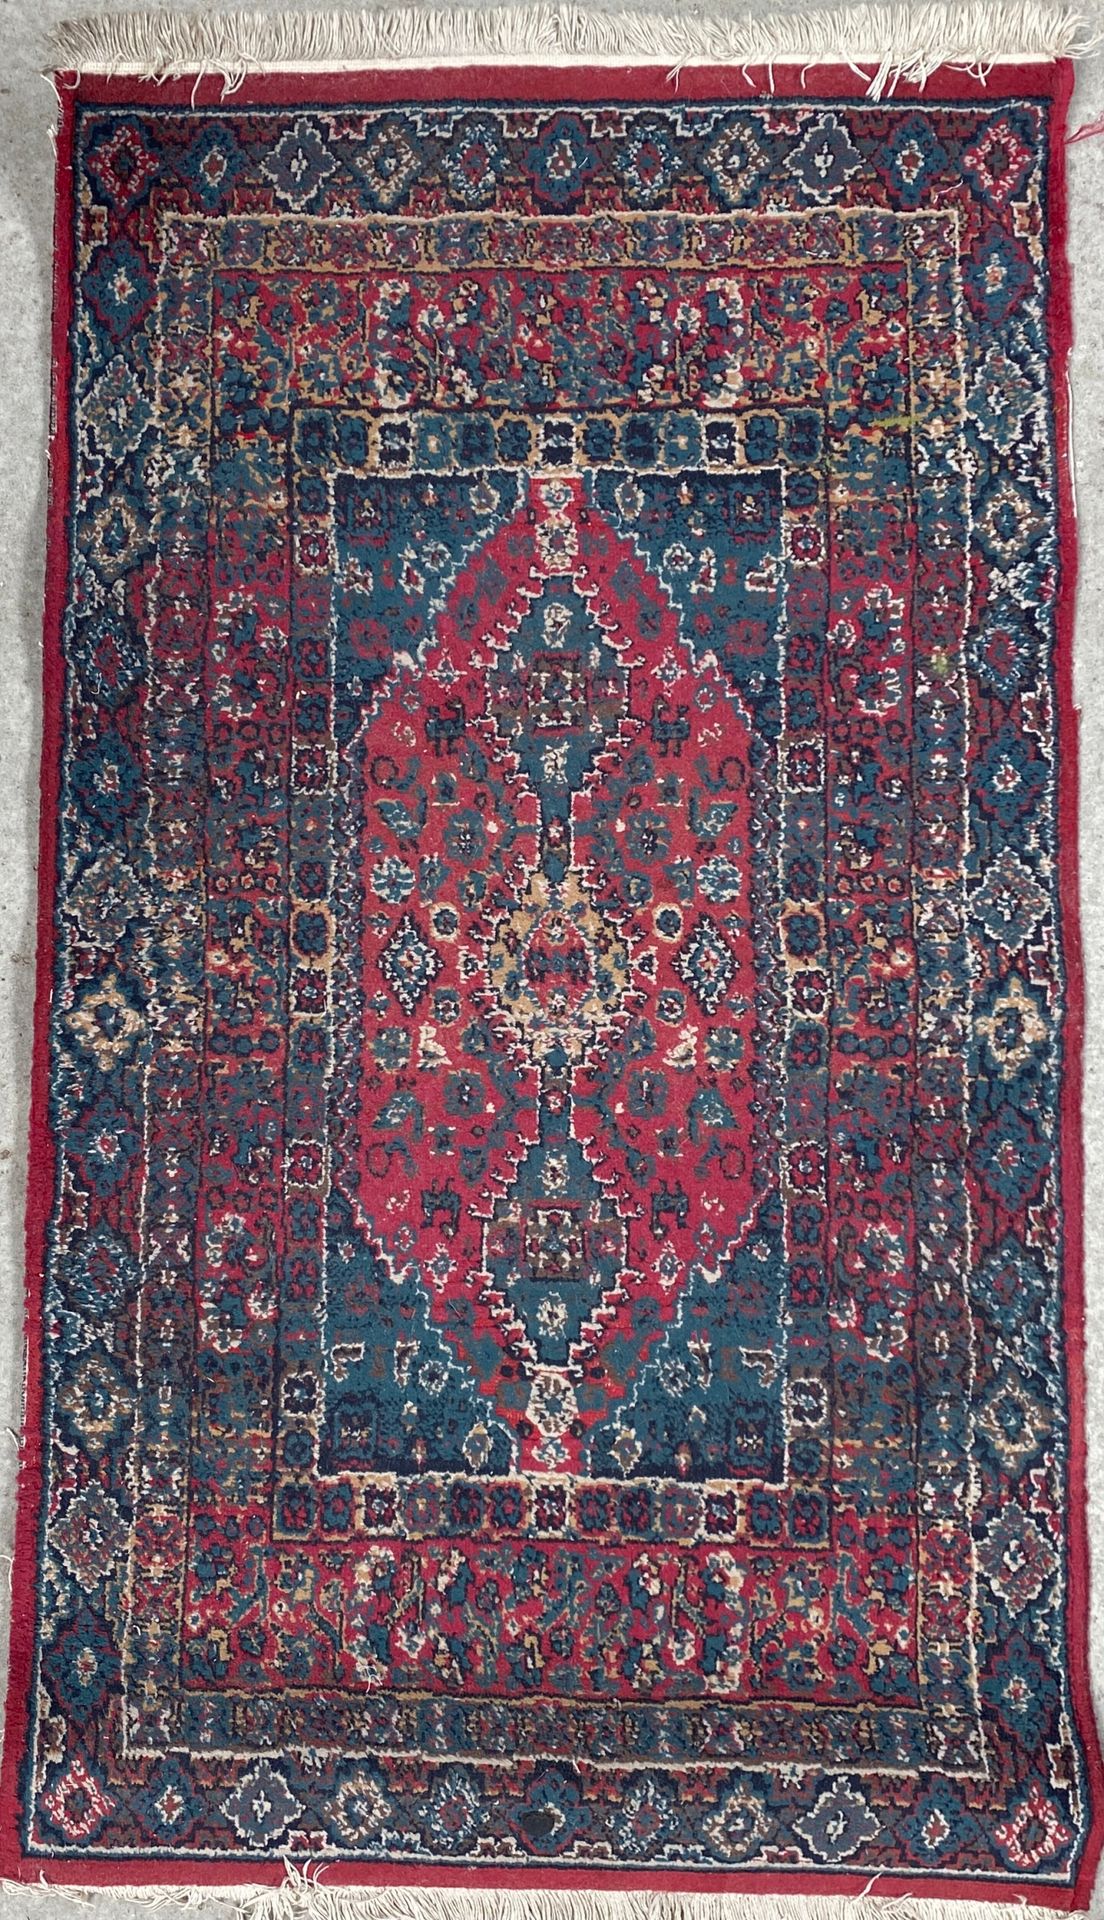 Null Wool carpet with motifs on a red background of a central medallion of recta&hellip;